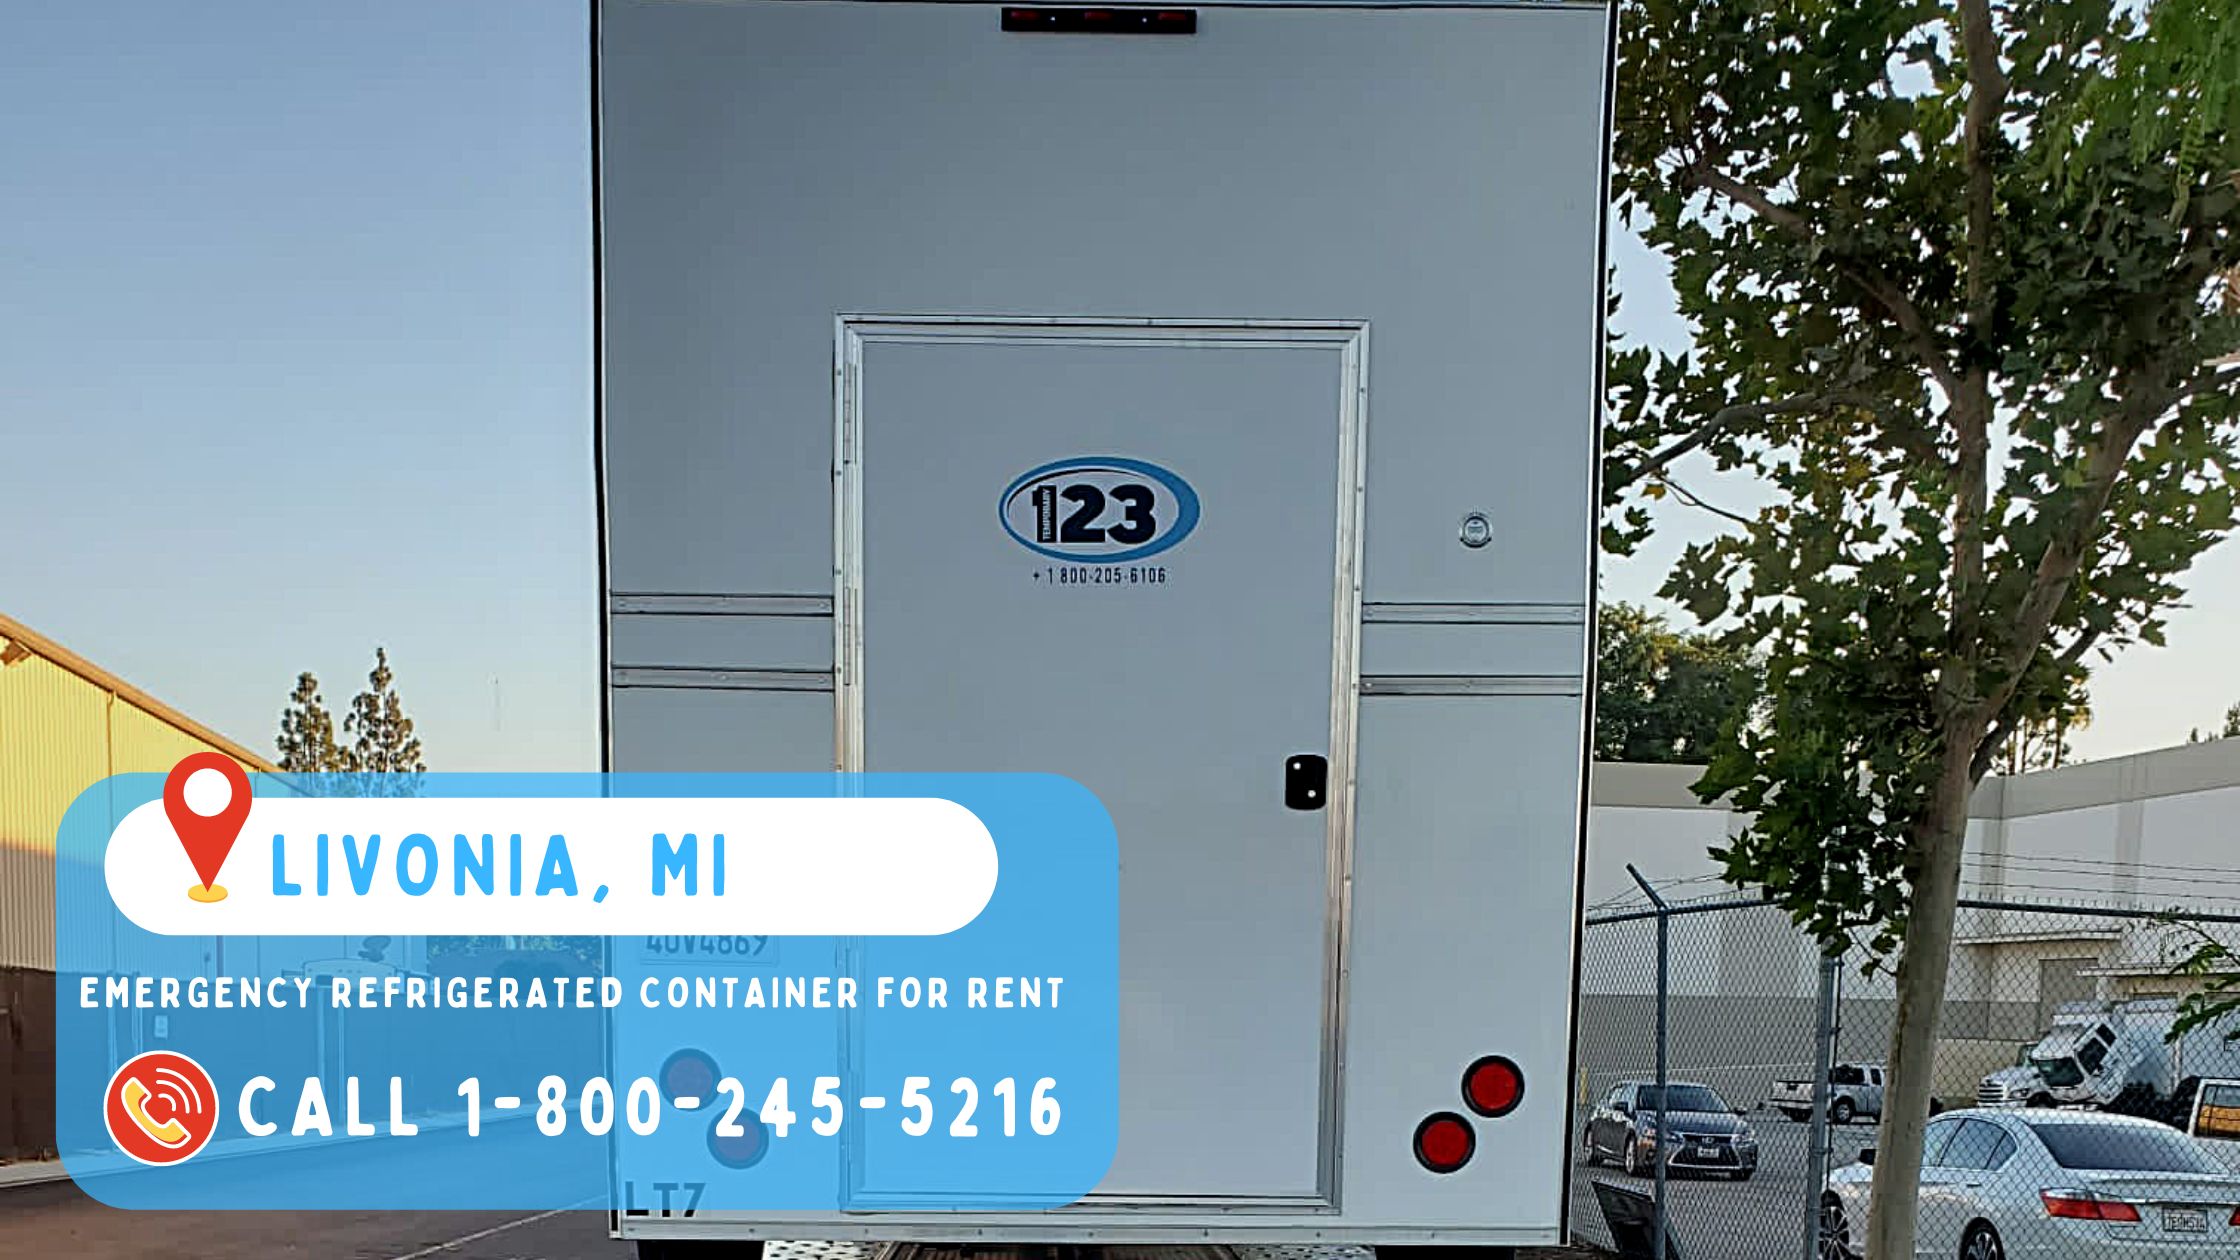 Emergency refrigerated container for rent in Livonia